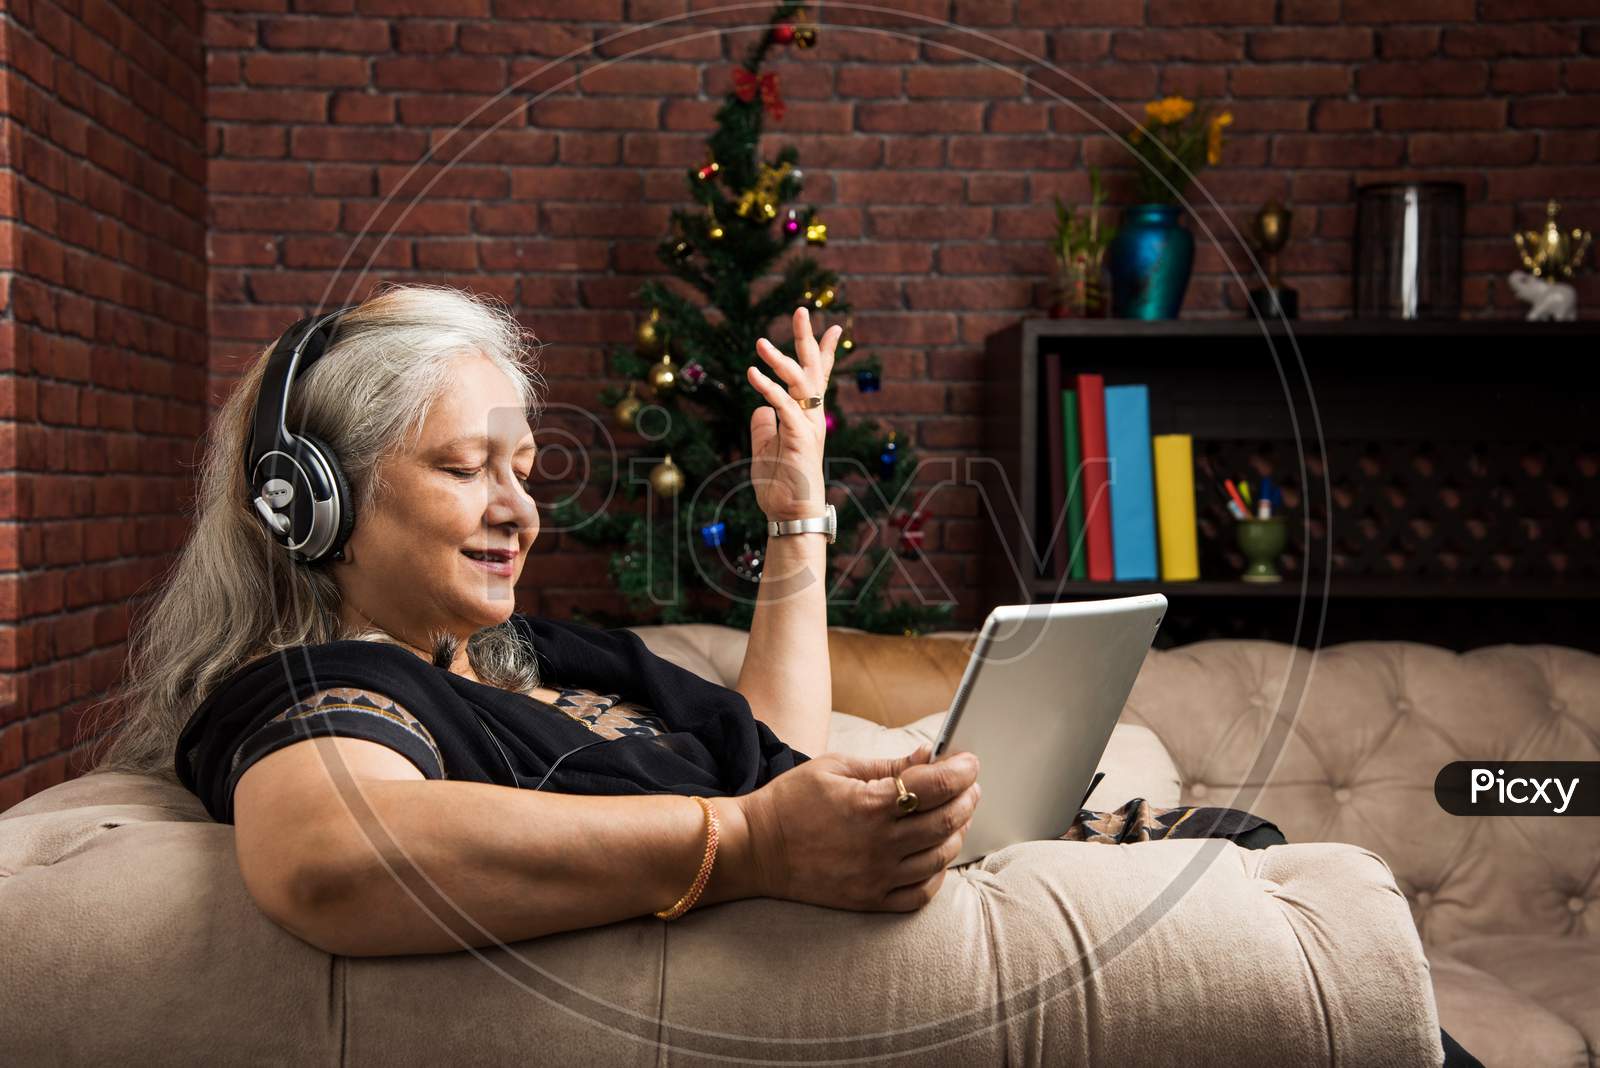 senior Indian/asian women listening to music using headphones while holding a tablet computer and sitting on sofa or couch at ho